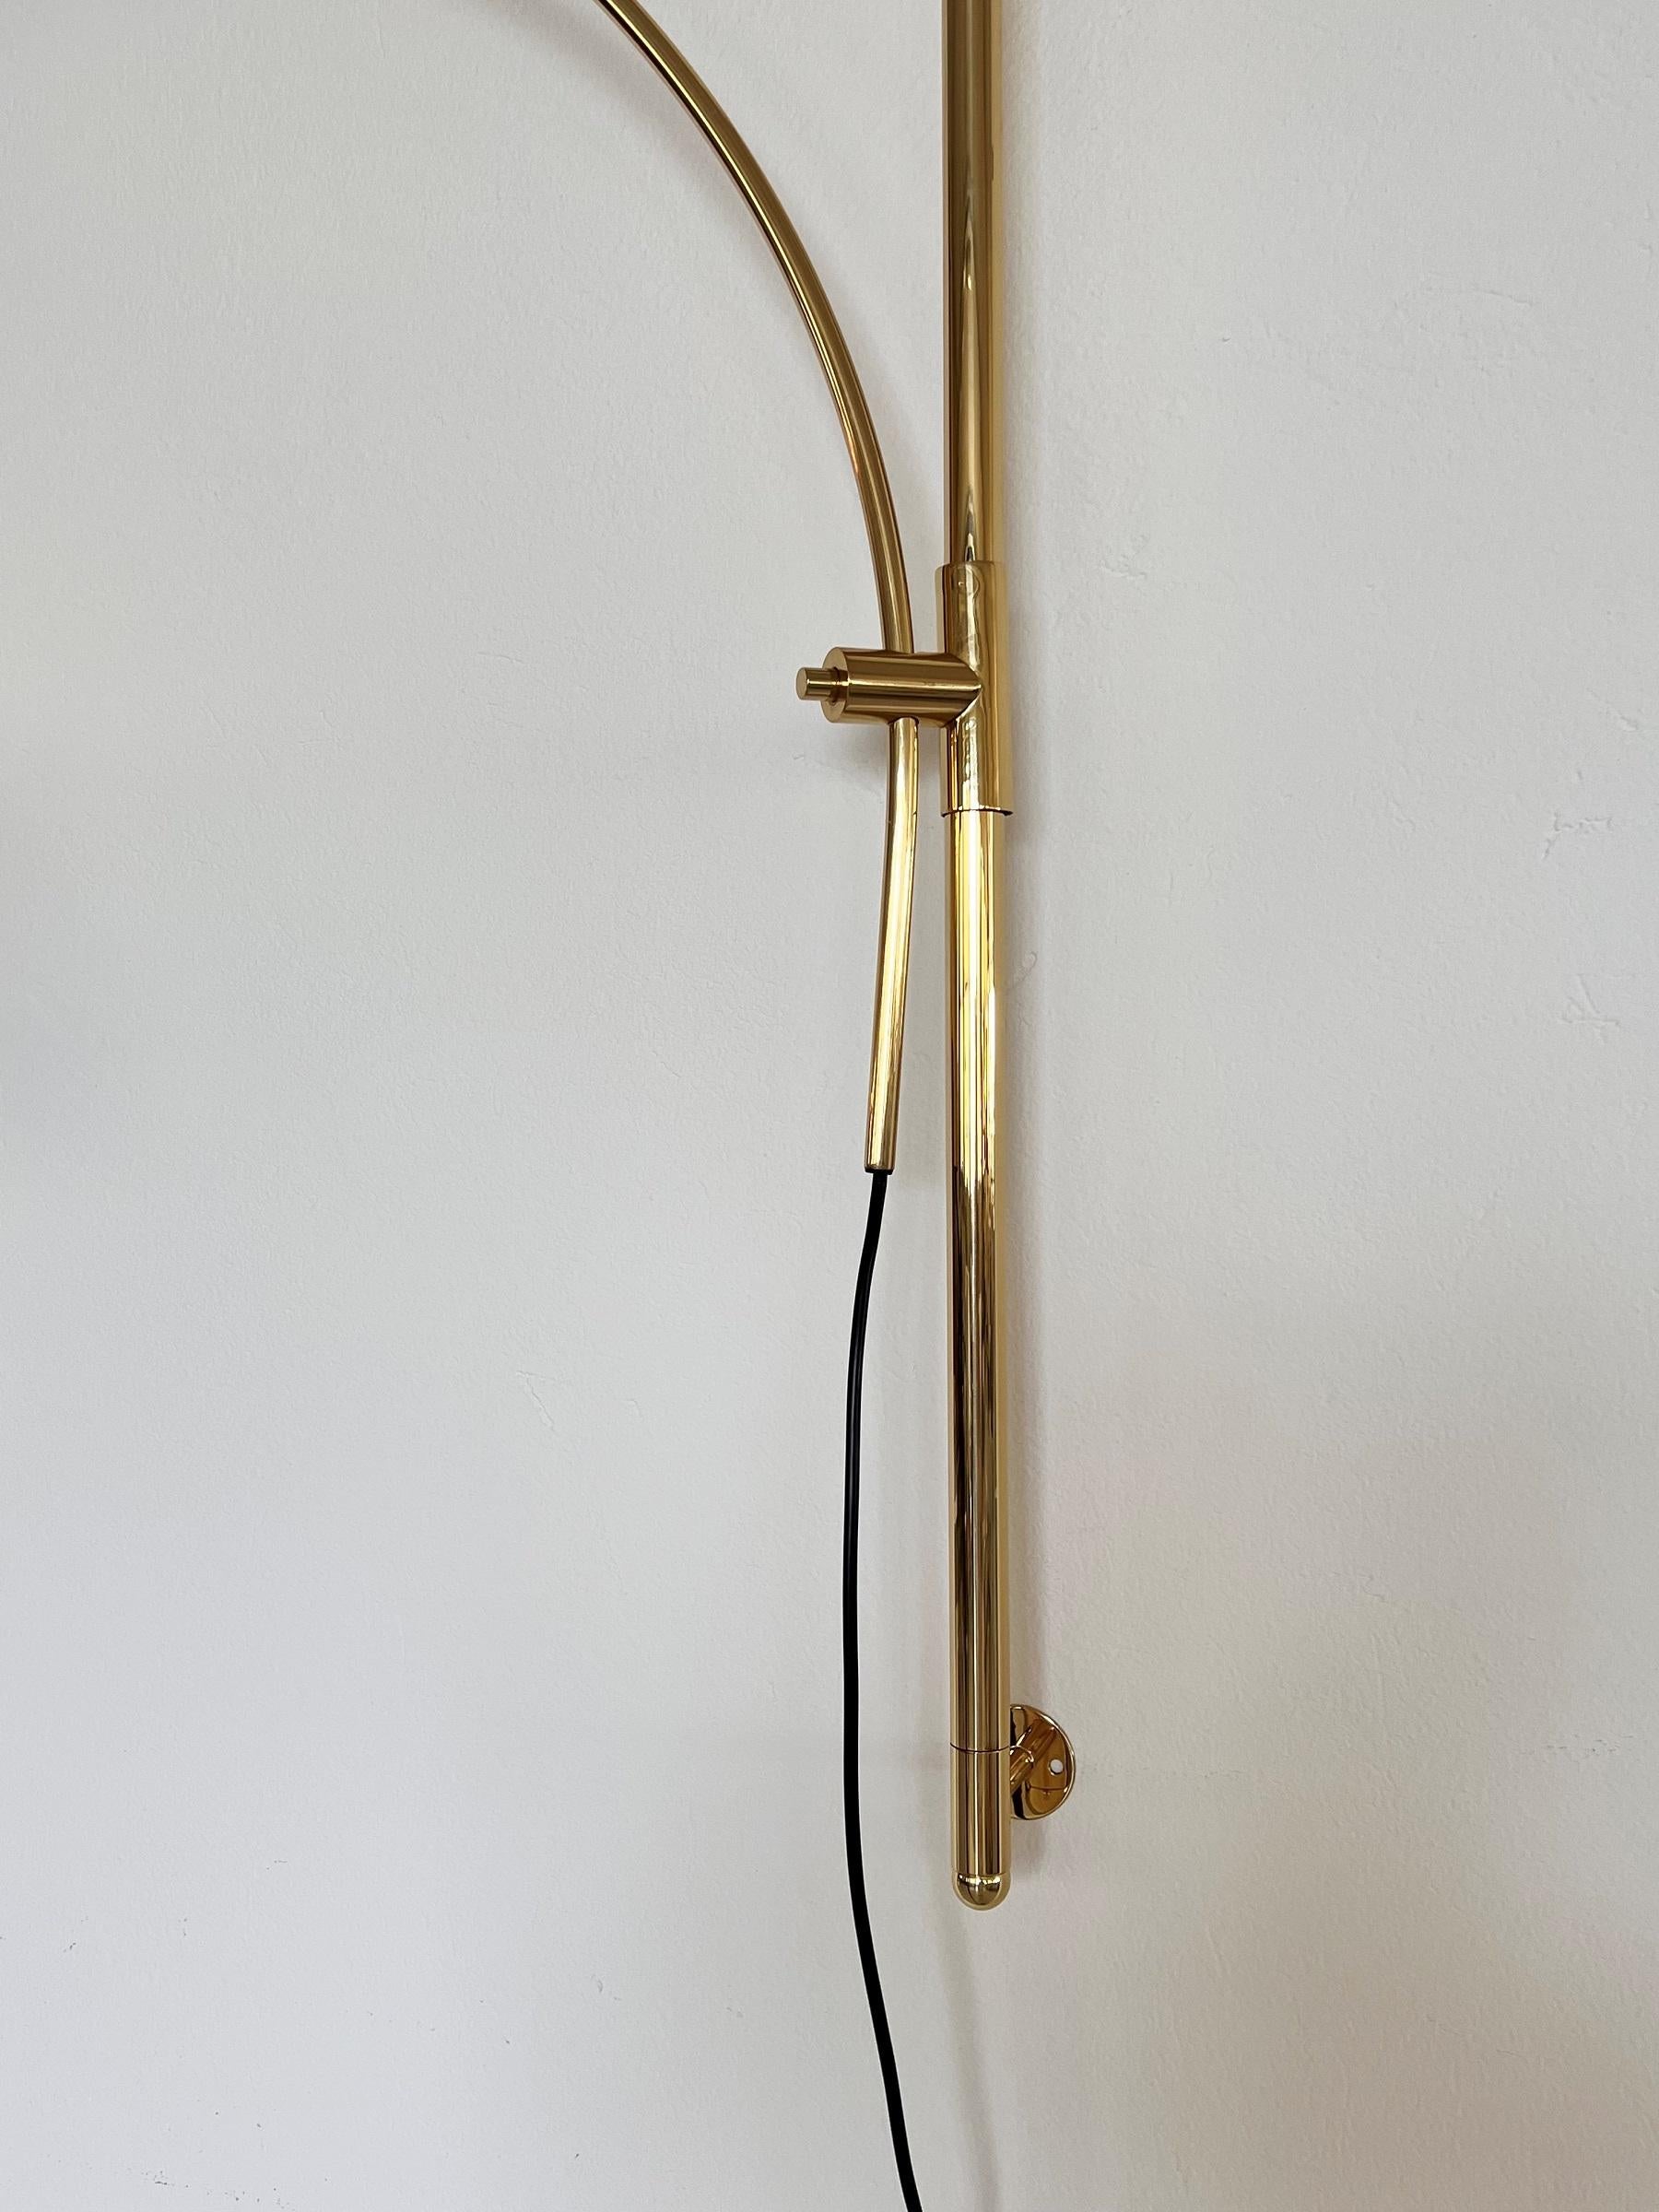 Late 20th Century Florian Schulz Vintage Adjustable Wall Mounted Arc Lamp in Brass, 1970s